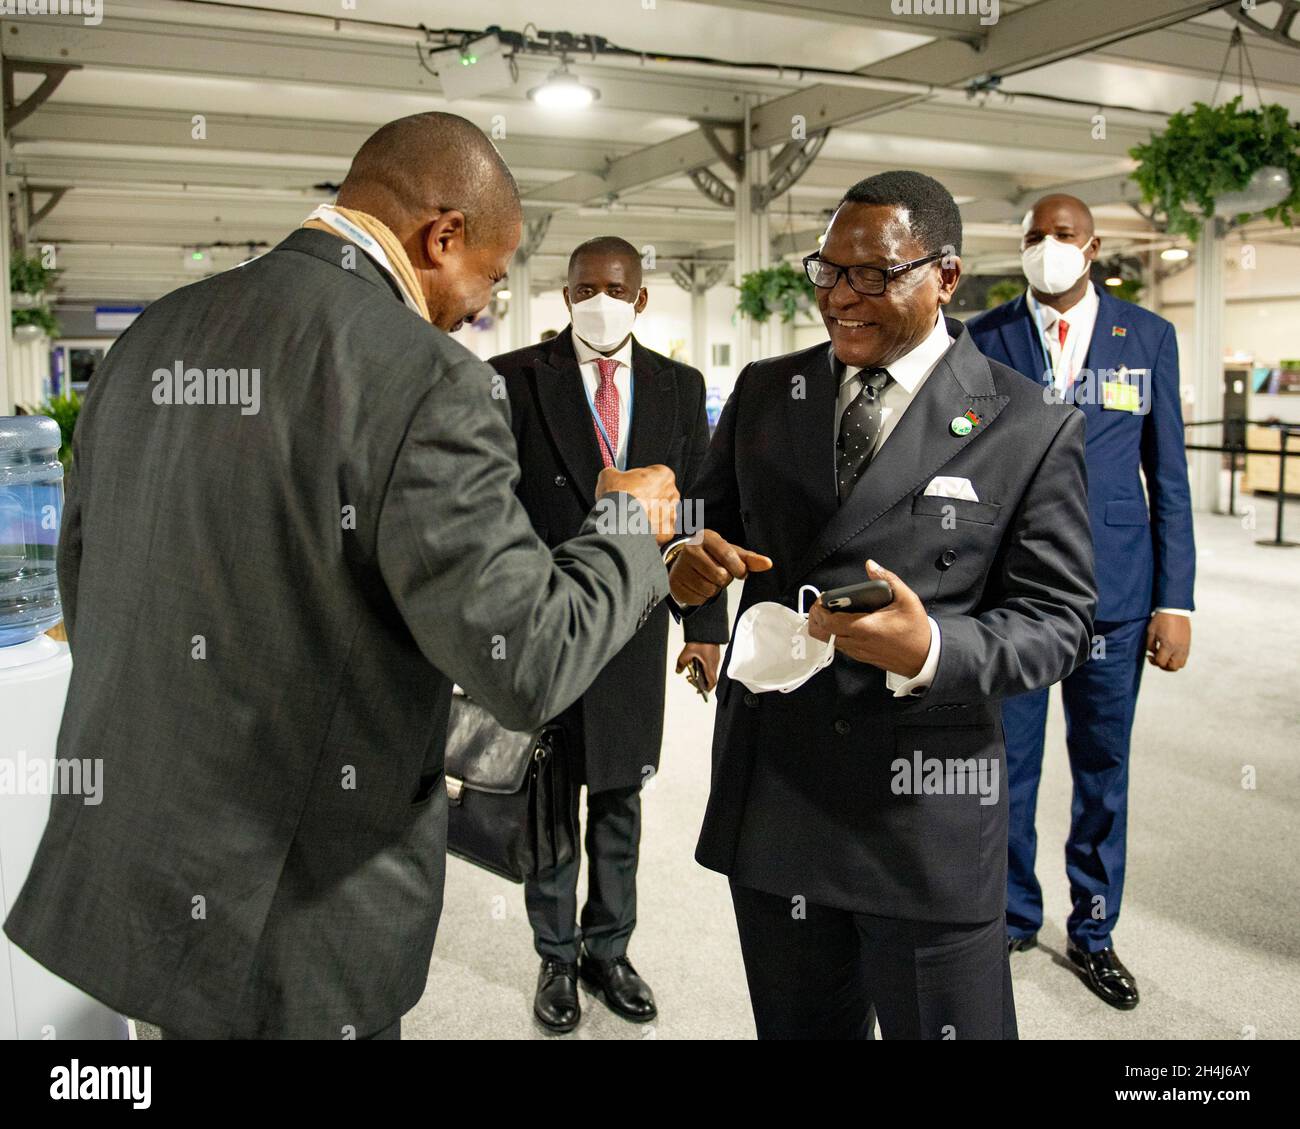 Glasgow, Scotland, UK. 2 November 2021 PICTURED: (right) President Lazarus Chakwera, President of Malawi seen at COP26 fist pumping a delegate. The president of the Republic of Malawi (Chichewa: Mtsogoleri wa Dziko la Malawi) is the head of state and head of government of Malawi. The president leads the executive branch of the Government of Malawi and is the commander-in-chief of the Malawian Defence Force. The current president is Lazarus Chakwera, who defeated Peter Mutharika in the 2020 rerun presidential election. Chakwera was sworn in as president of Malawi on 28 June. Credit: Colin Fishe Stock Photo